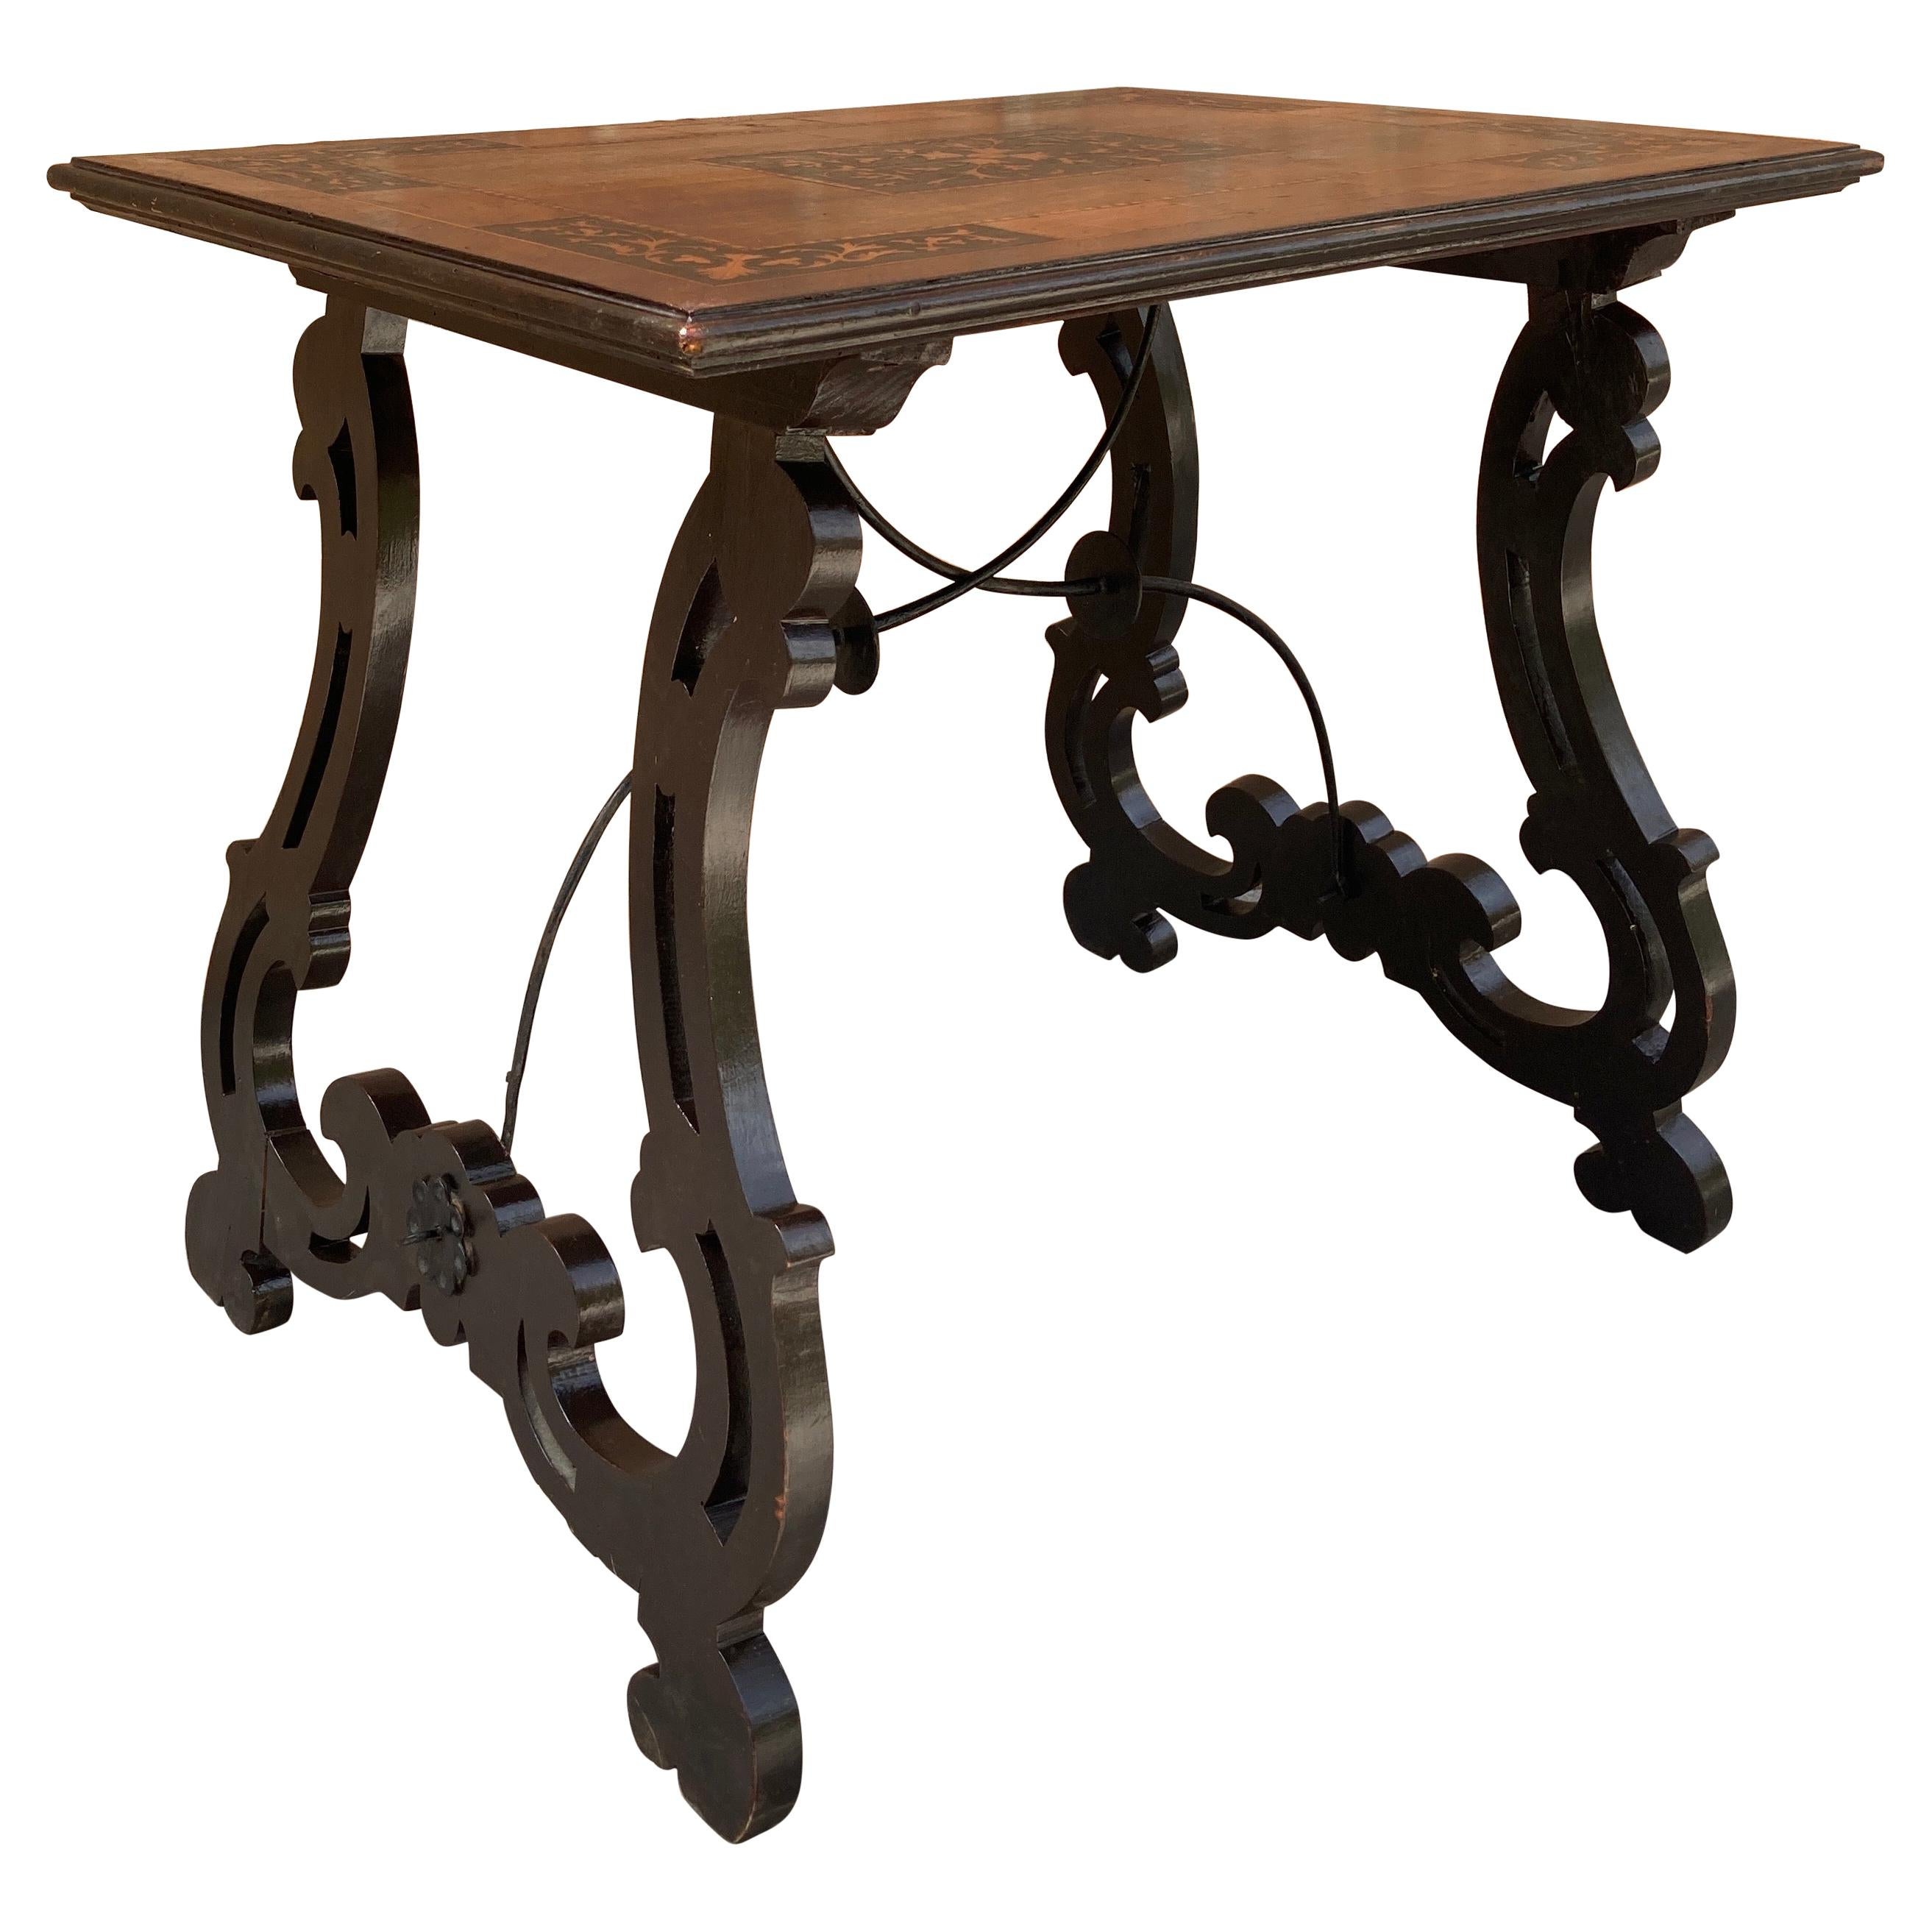 Spanish Early 19th Century Baroque Side Table with Lyre Legs and Marquetry Top